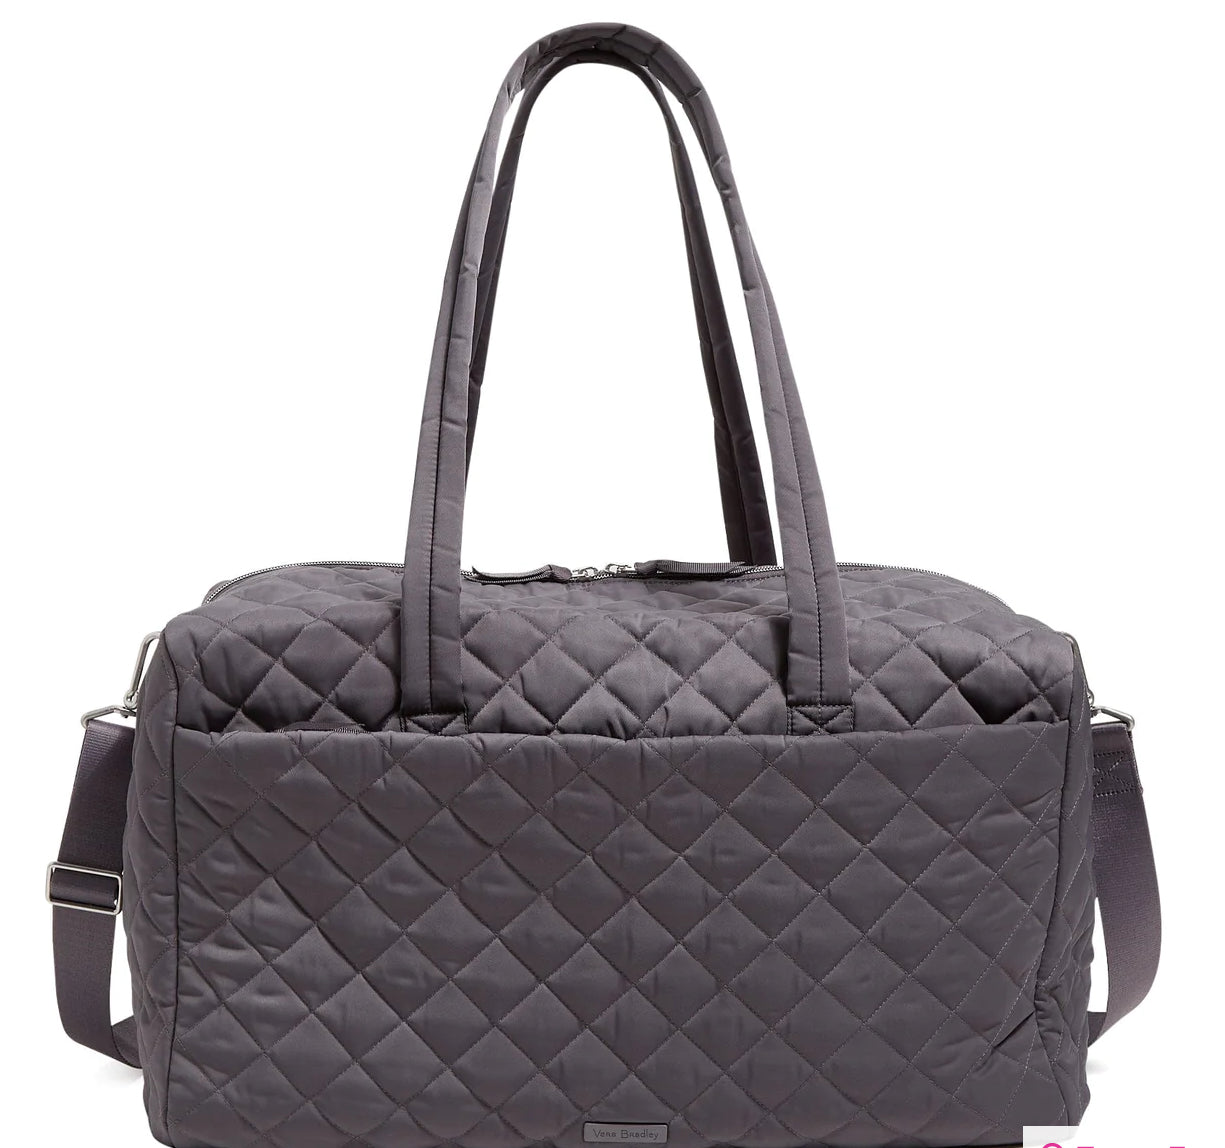 Large Travel Duffel - Perrotti's Country Barn